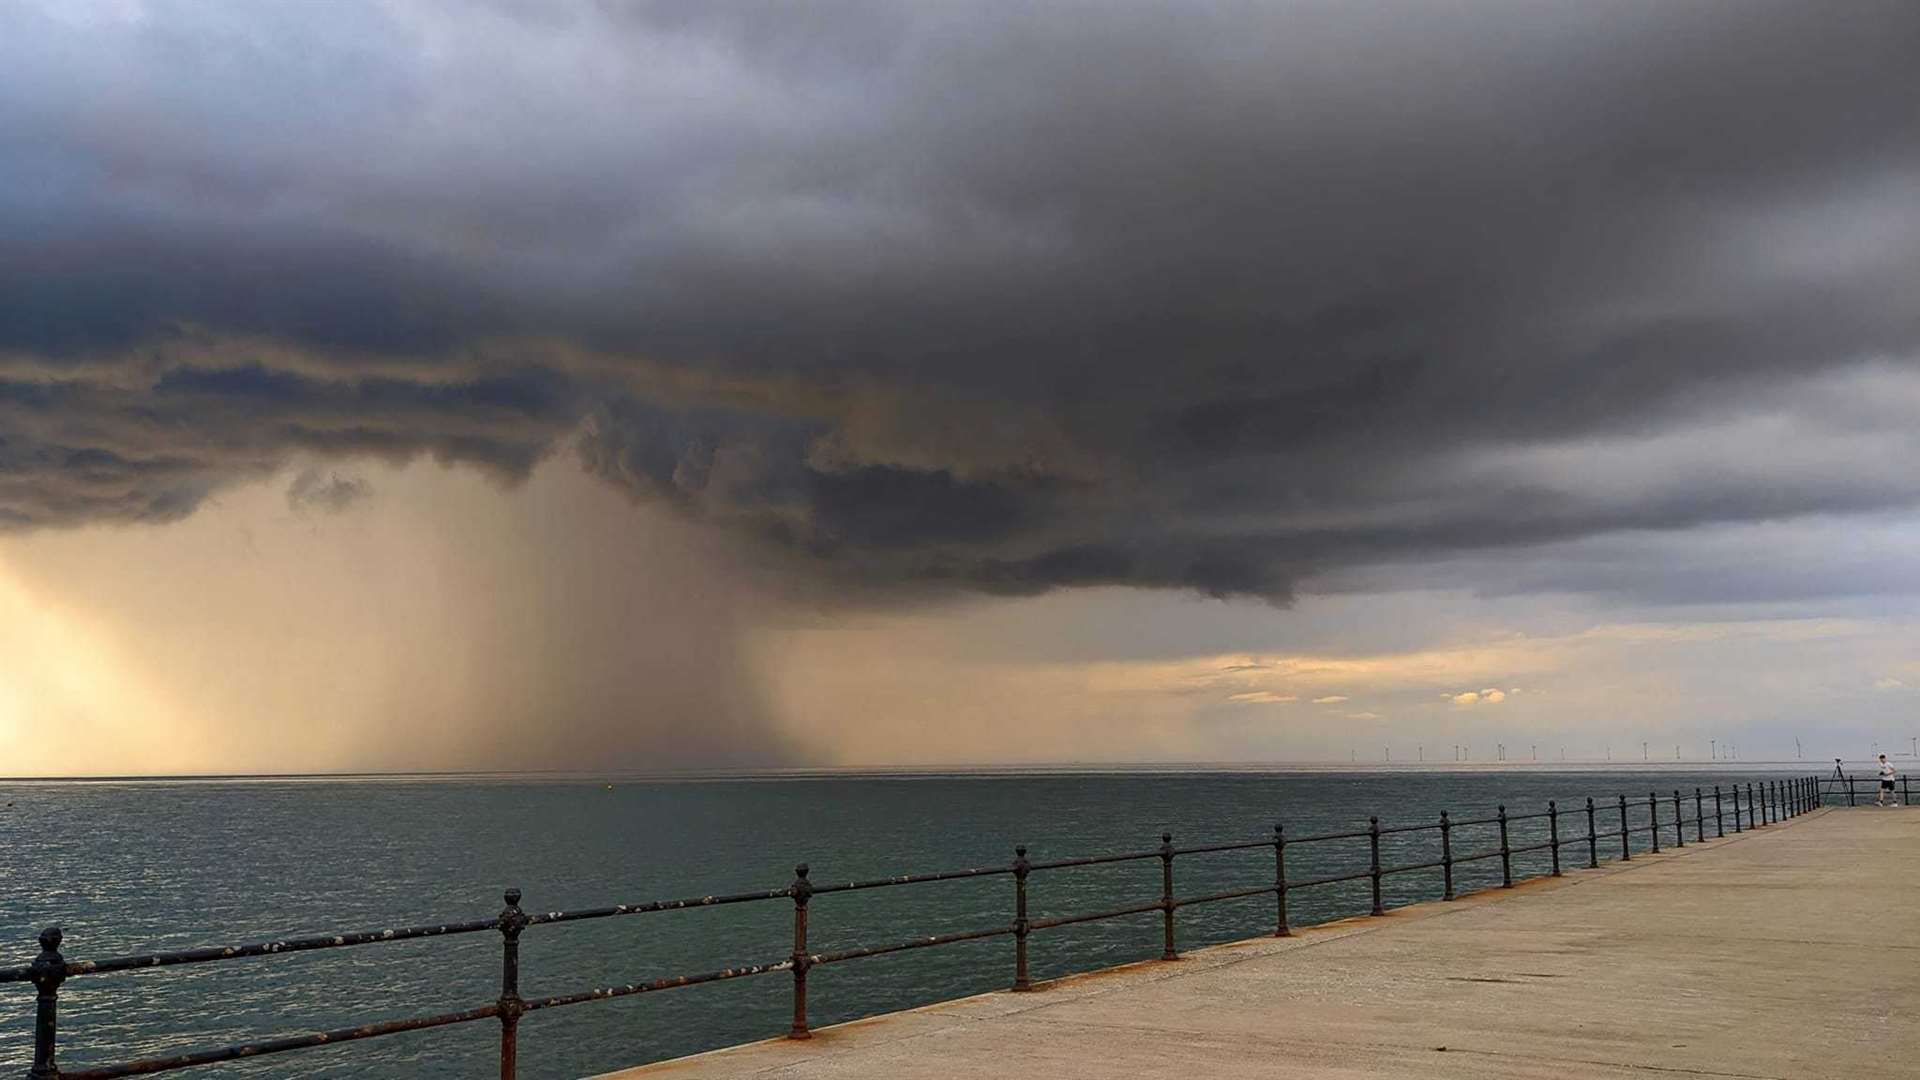 Lewis Perry-French caught a cascade of rain over the sea in Herne Bay. Picture: Lewis Perry-French